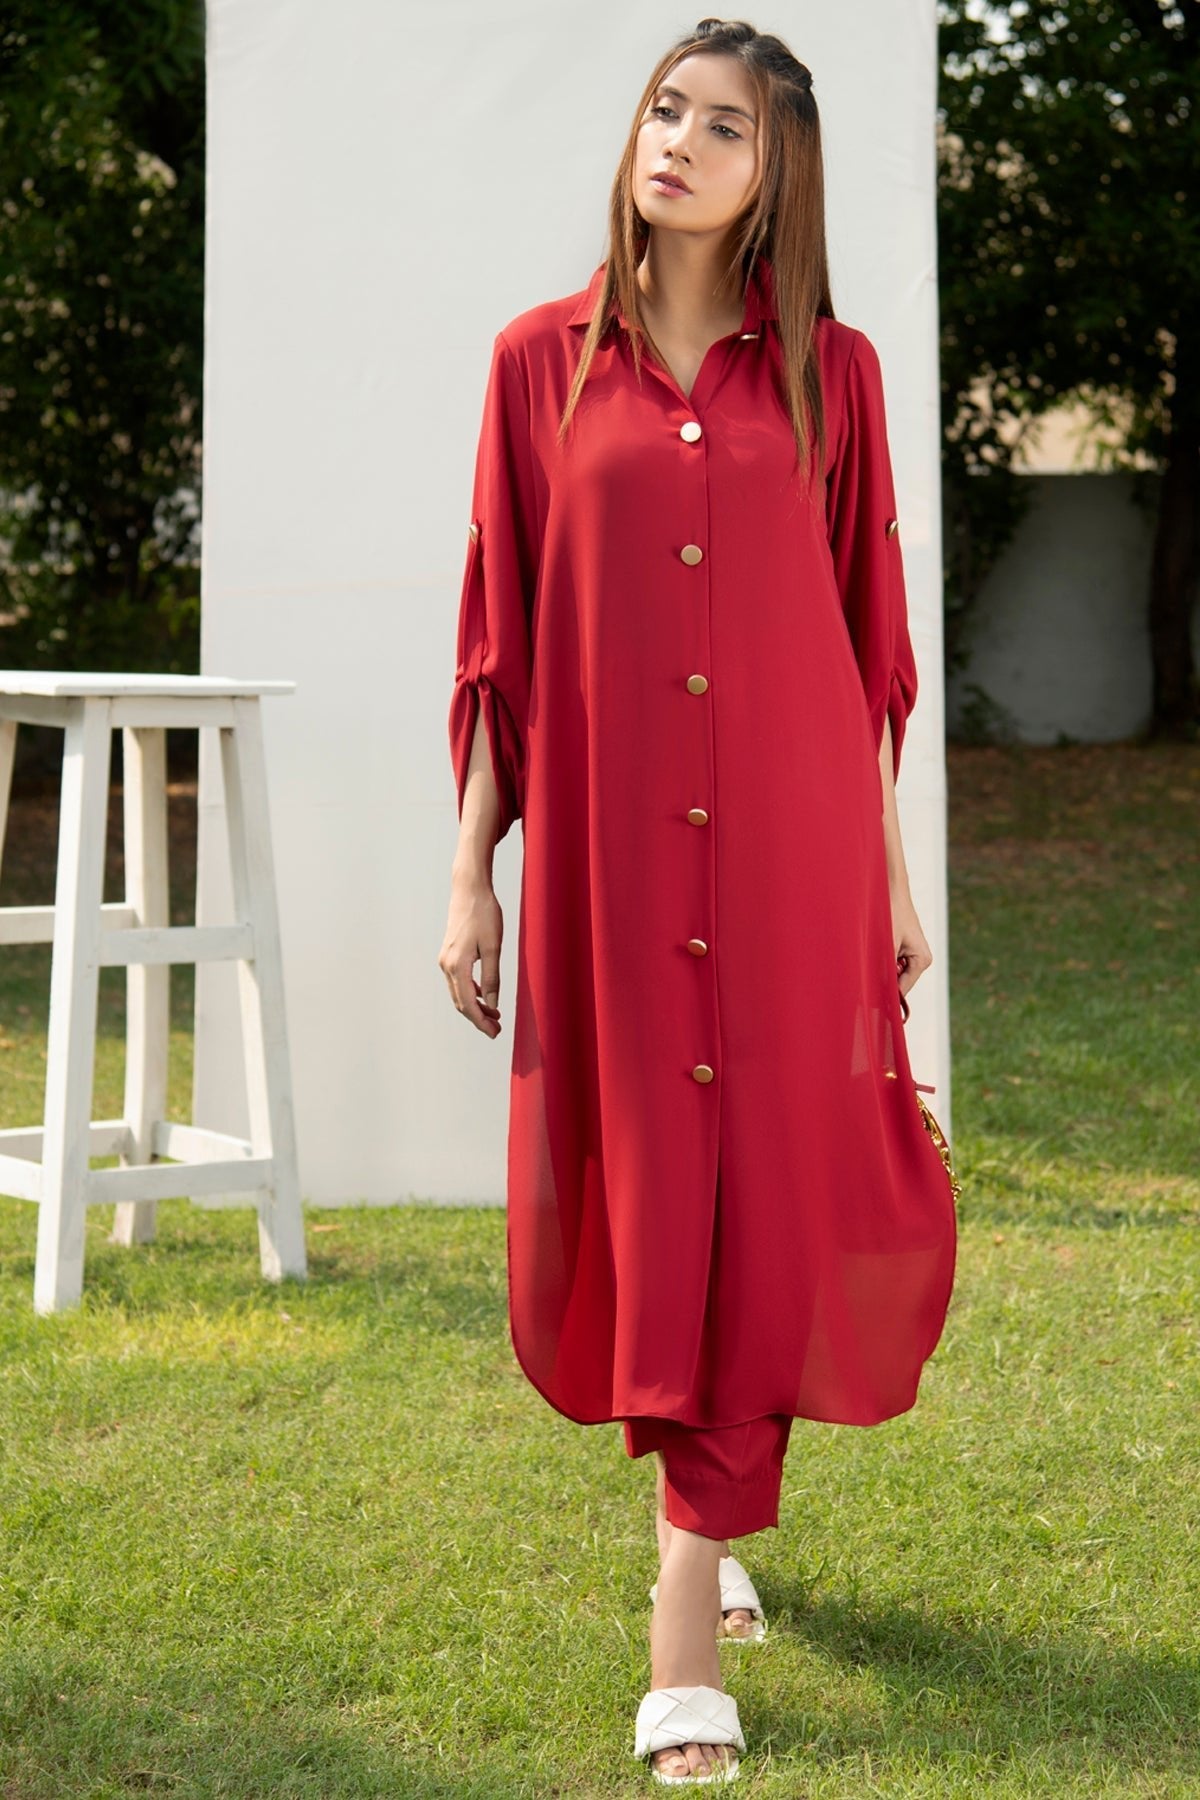 Solid Red Buttoned Dress - Peach Republic